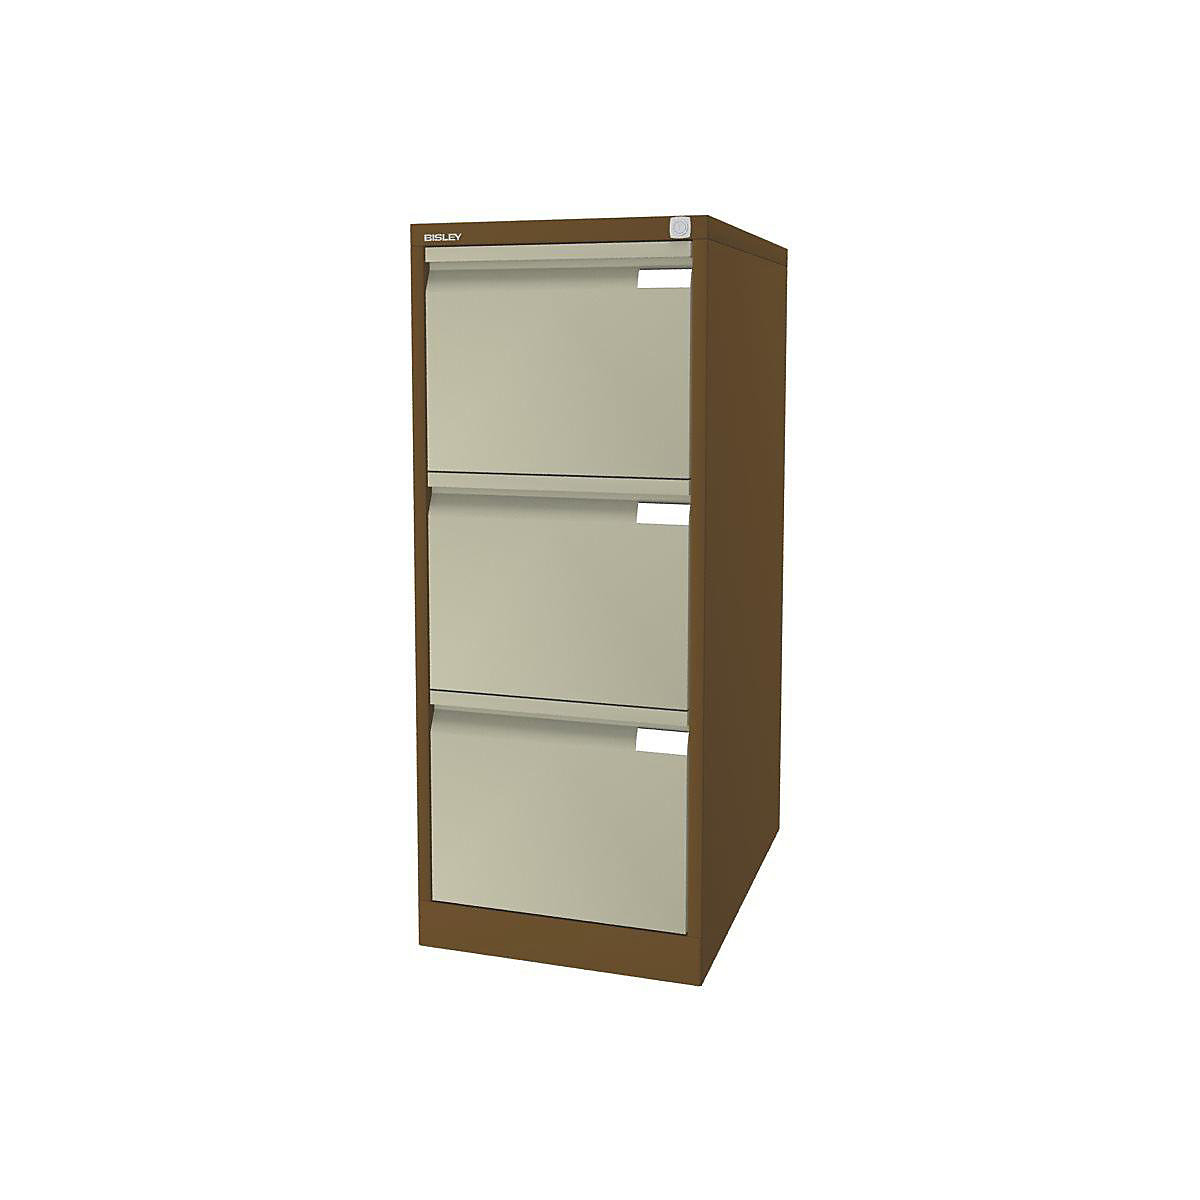 Suspension file cabinet, 1-track – BISLEY, 3 A4 drawers, sepia brown/creme-7